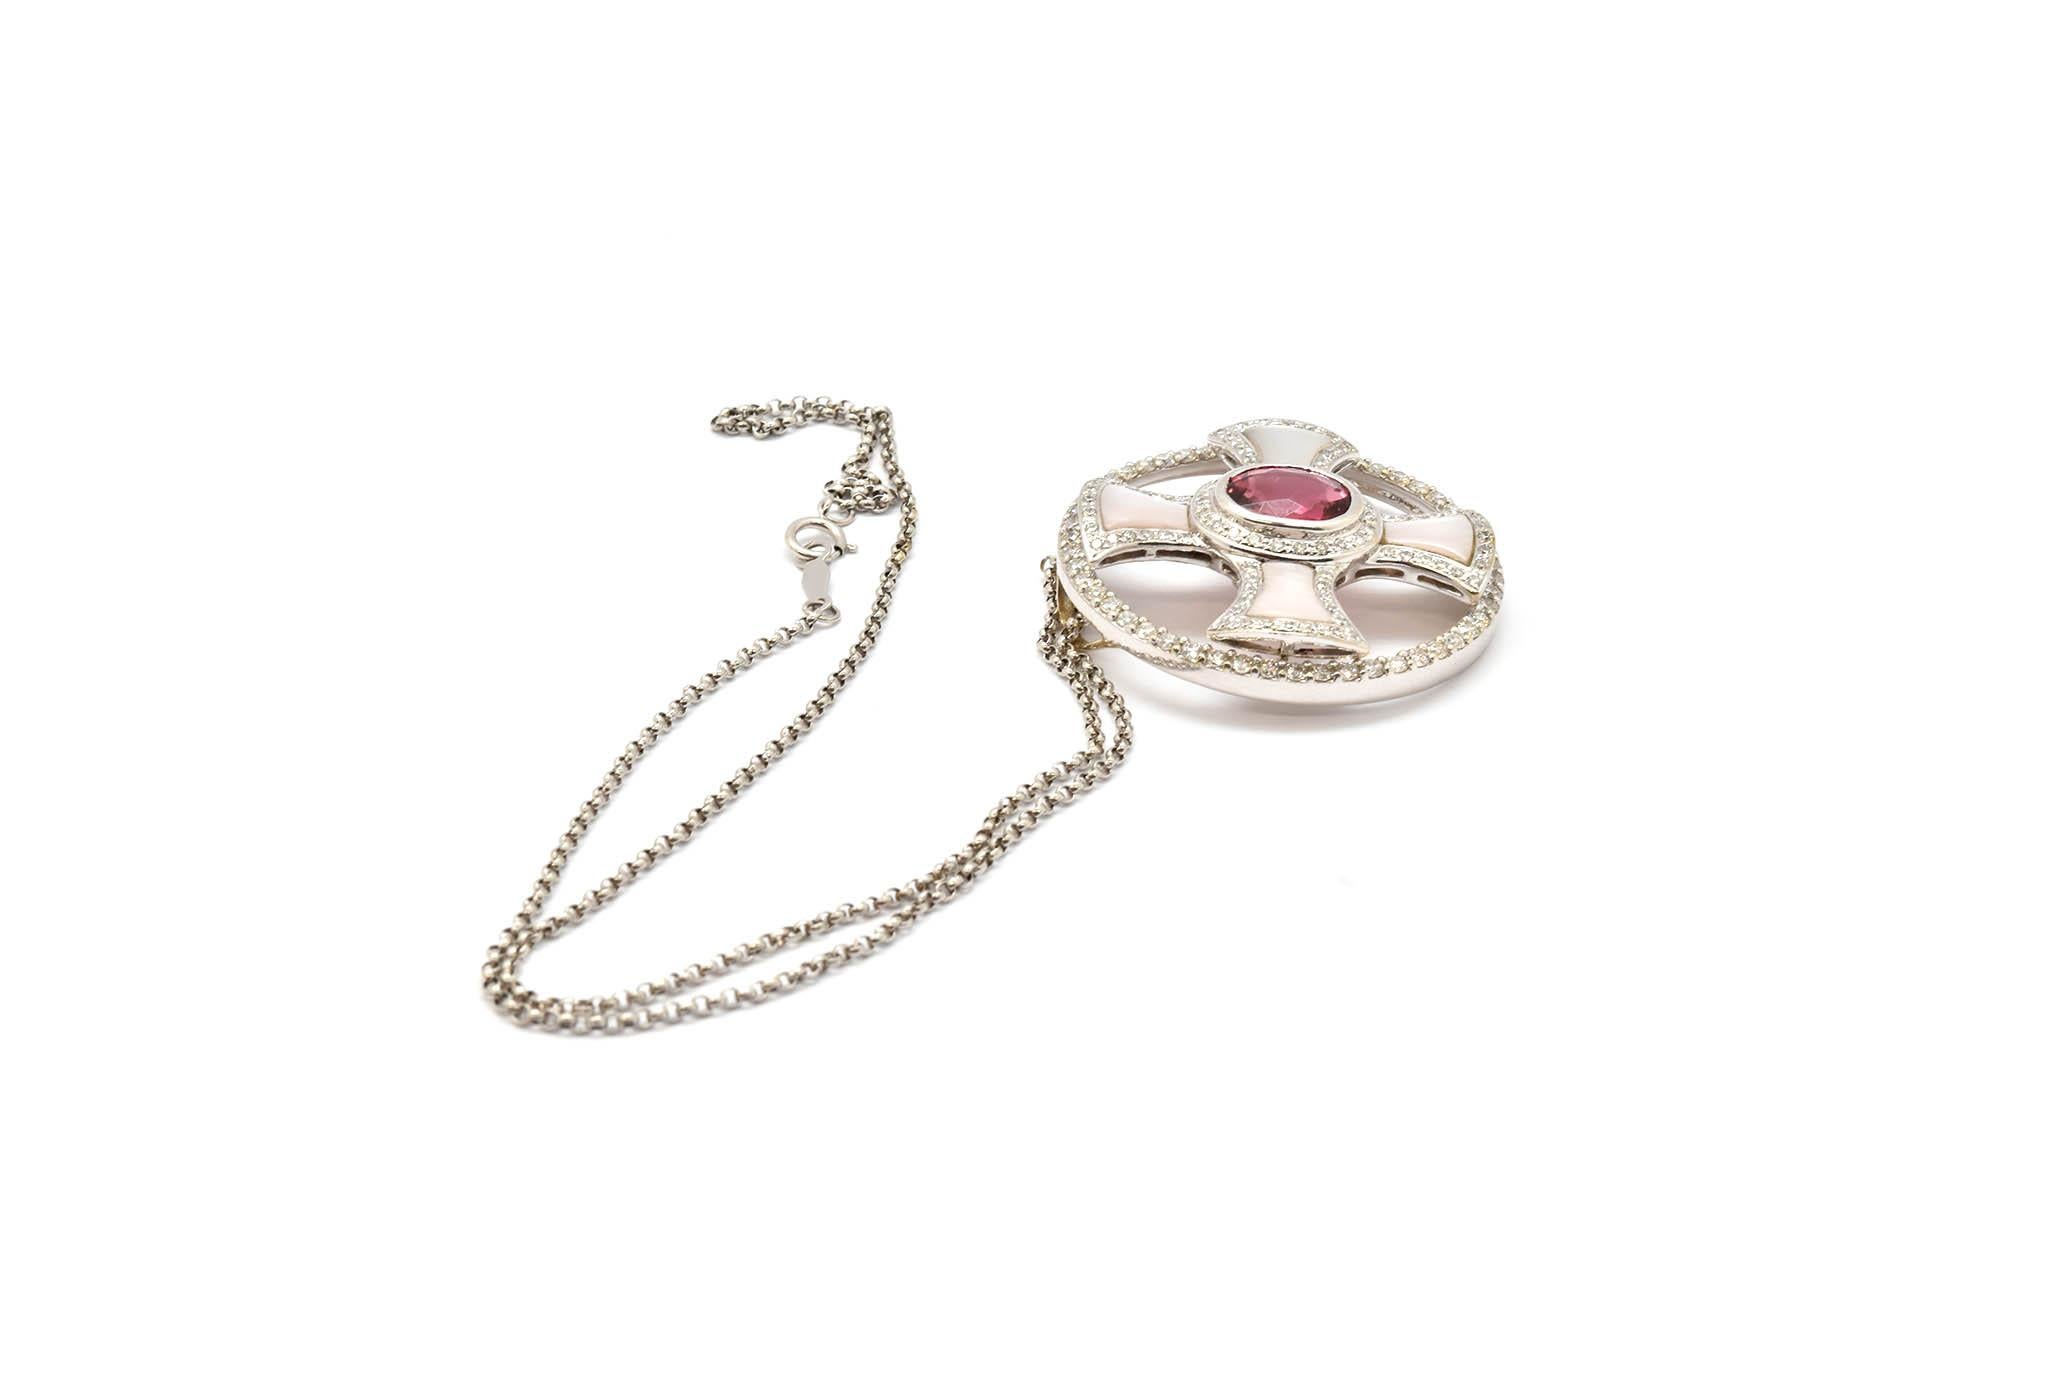 Contemporary Custom 14 Karat White Gold Diamond, Pink Tourmaline and Mother-of-Pearl Necklace For Sale